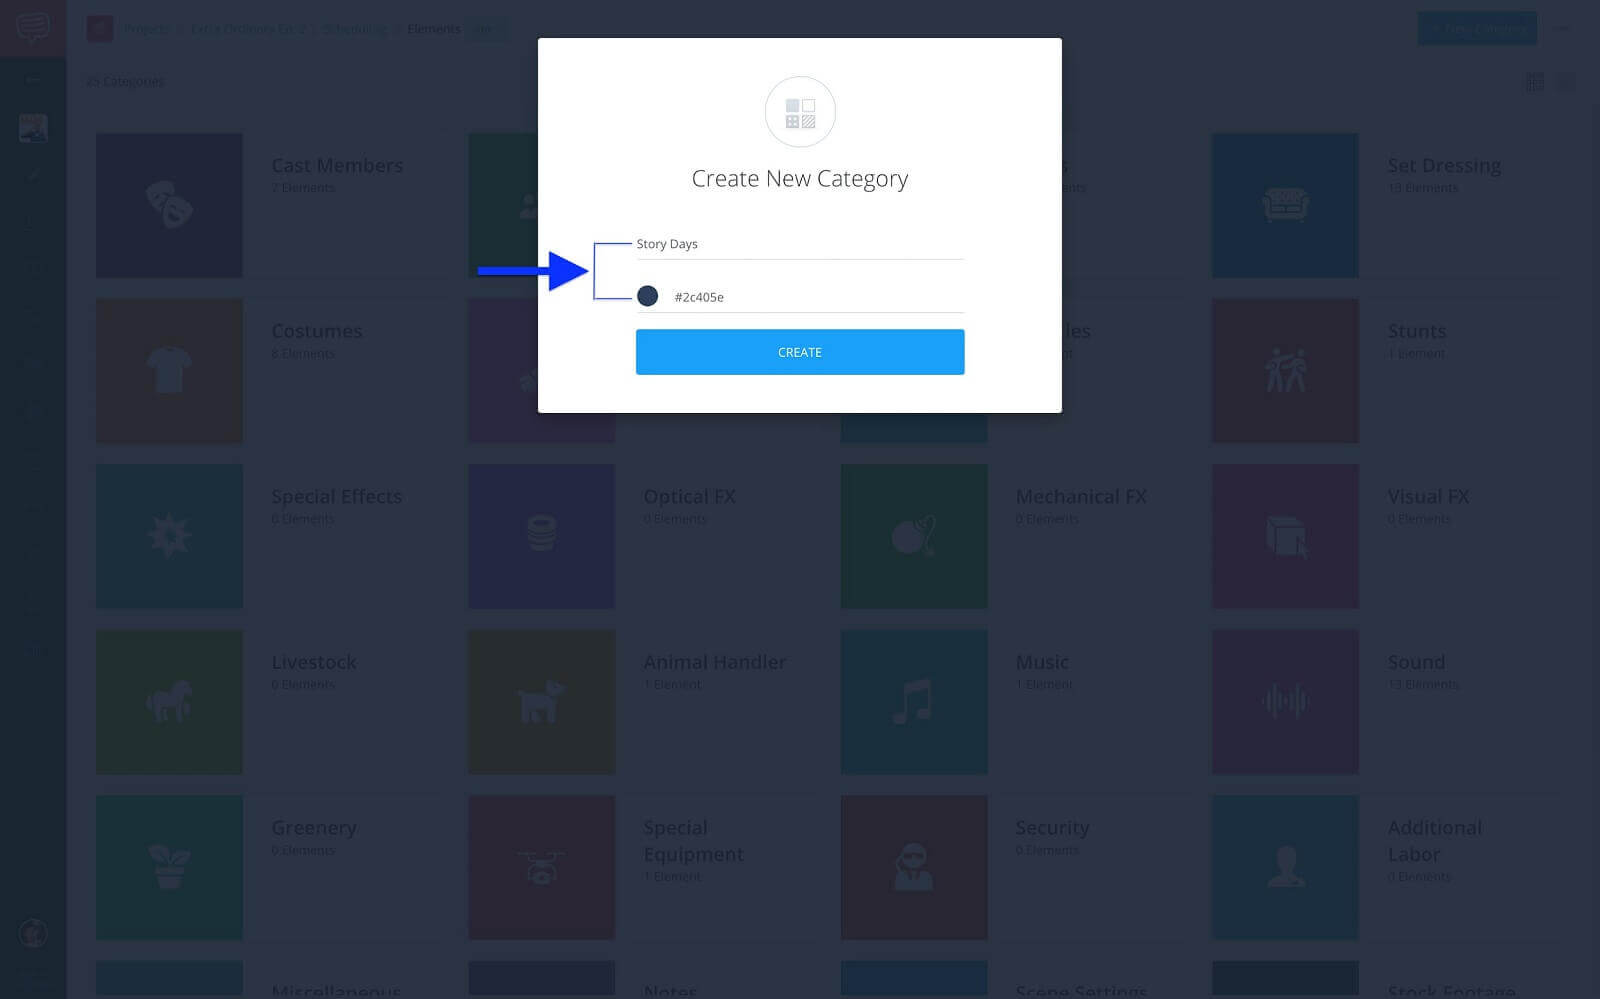 Create New Category Box - Assign Category Name, Color